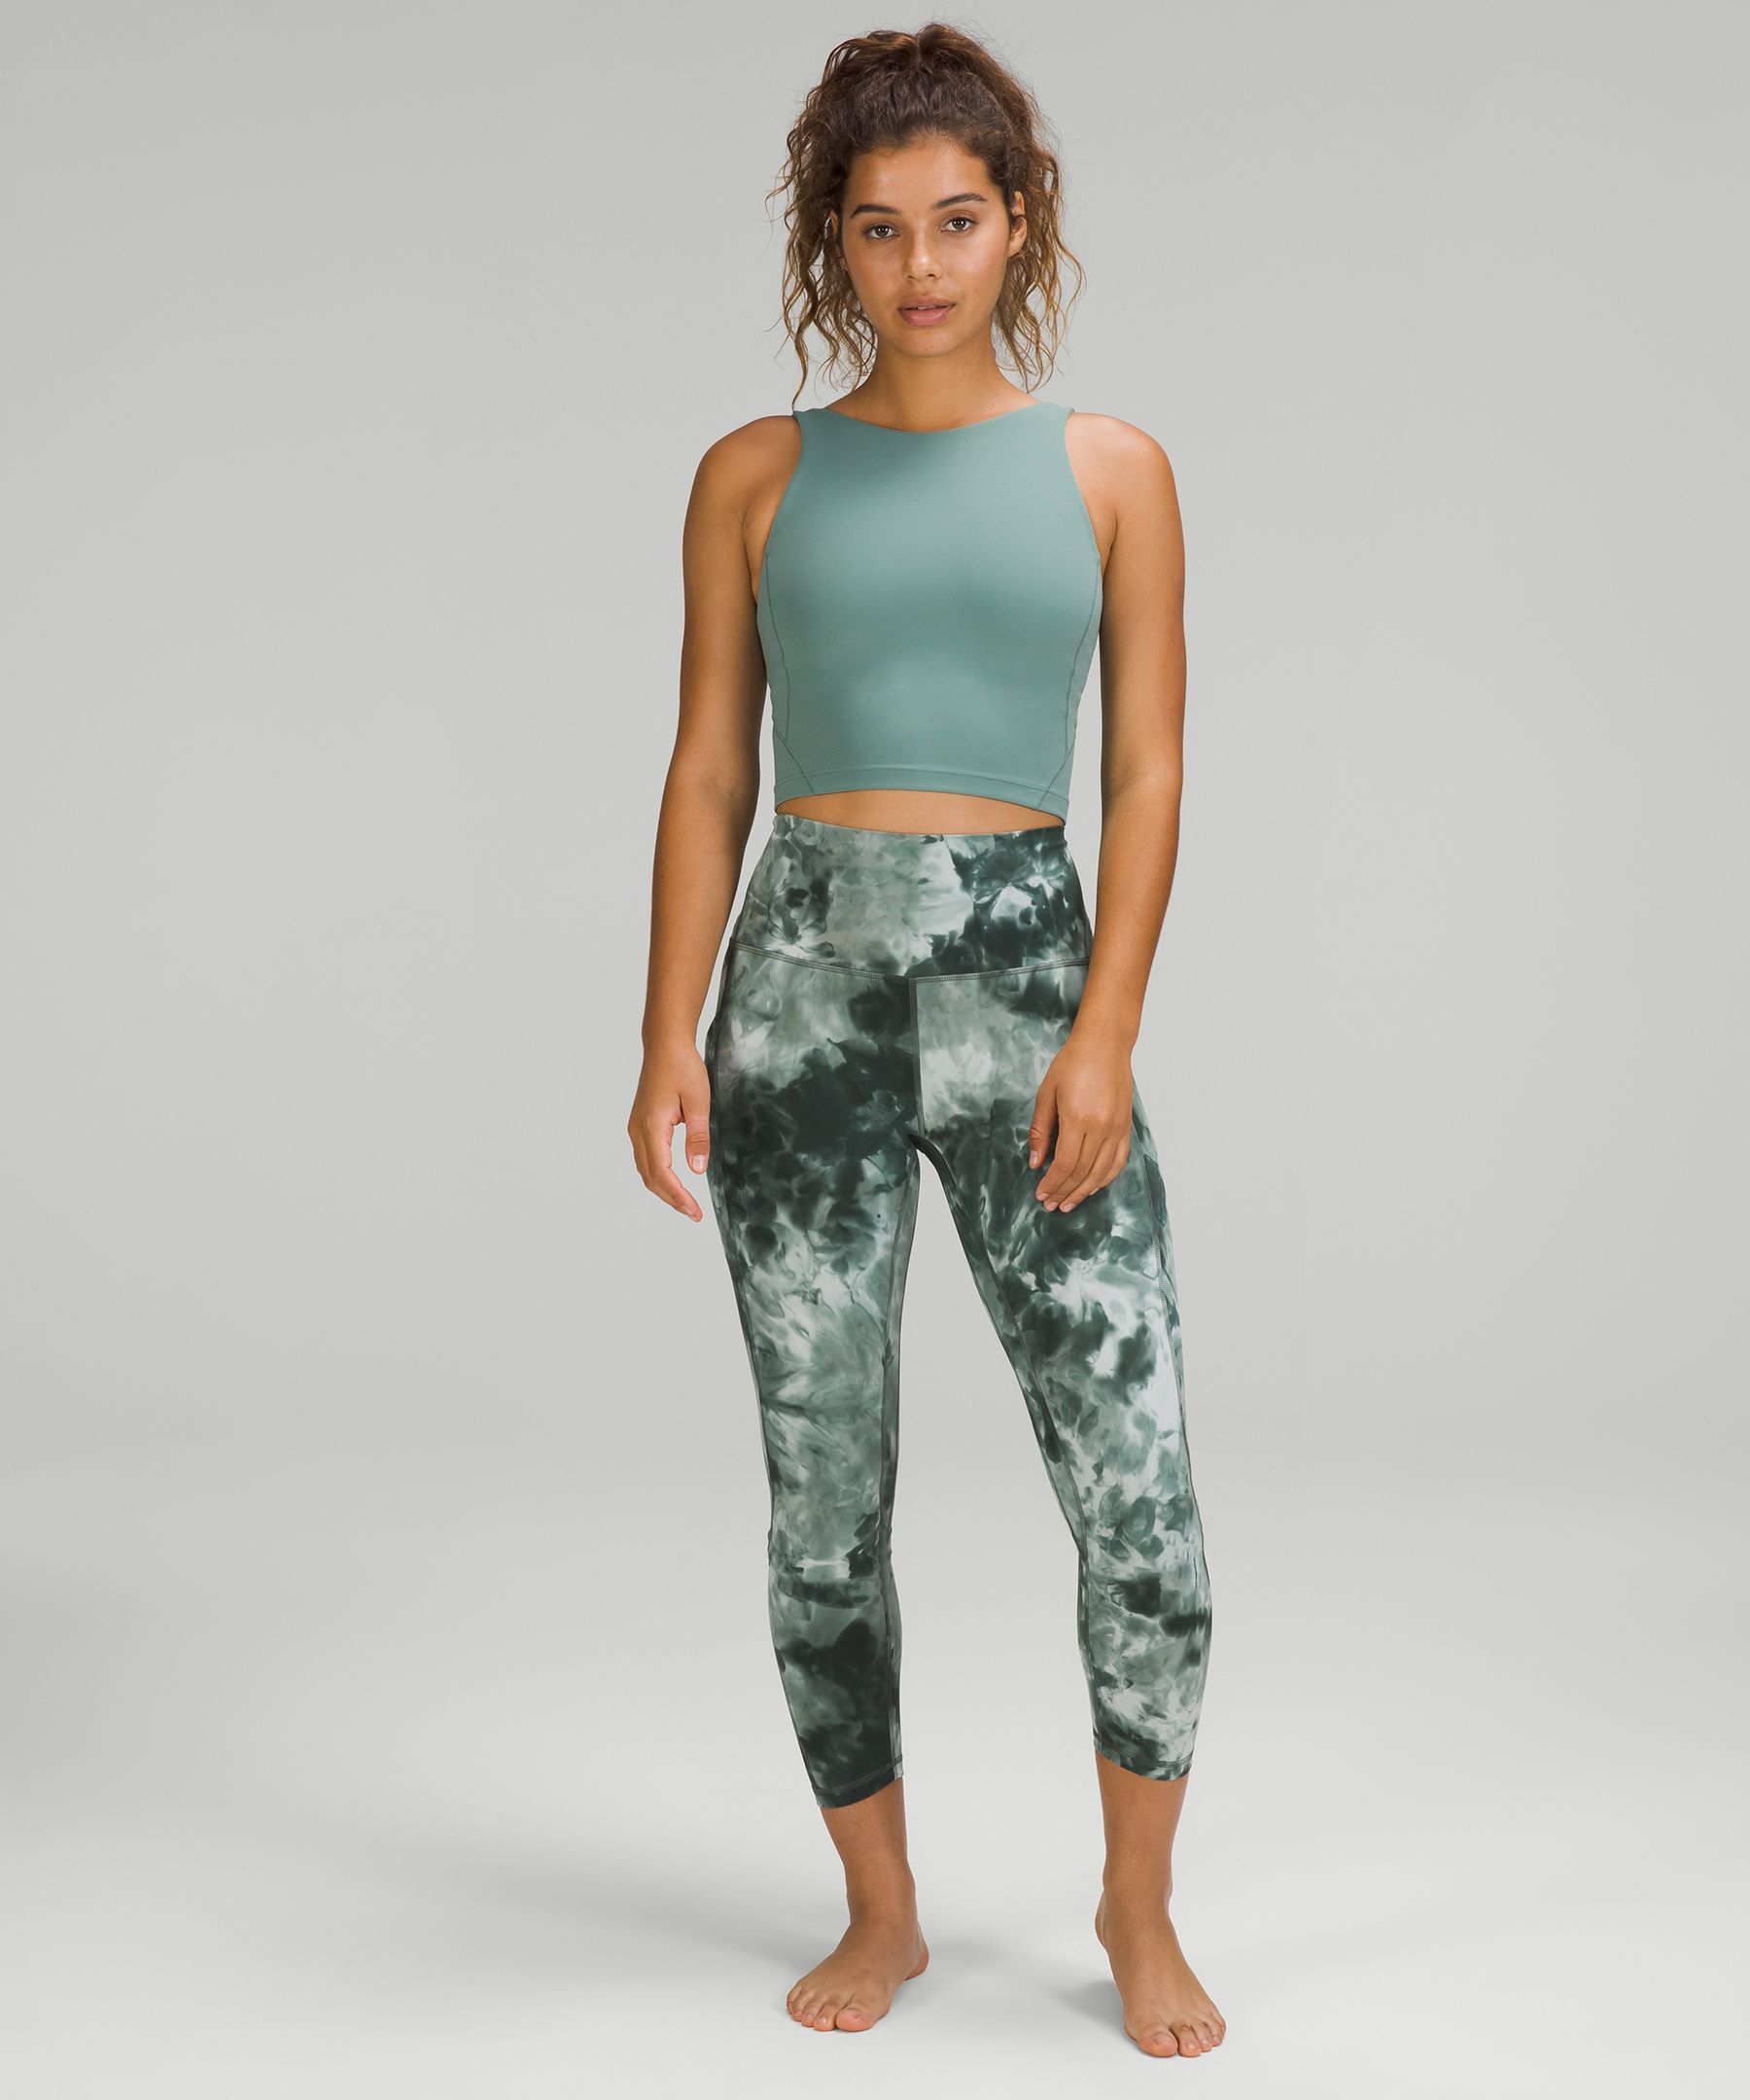 Track lululemon Align™ High-Rise Pant with Pockets 25 - Gradiate Geo